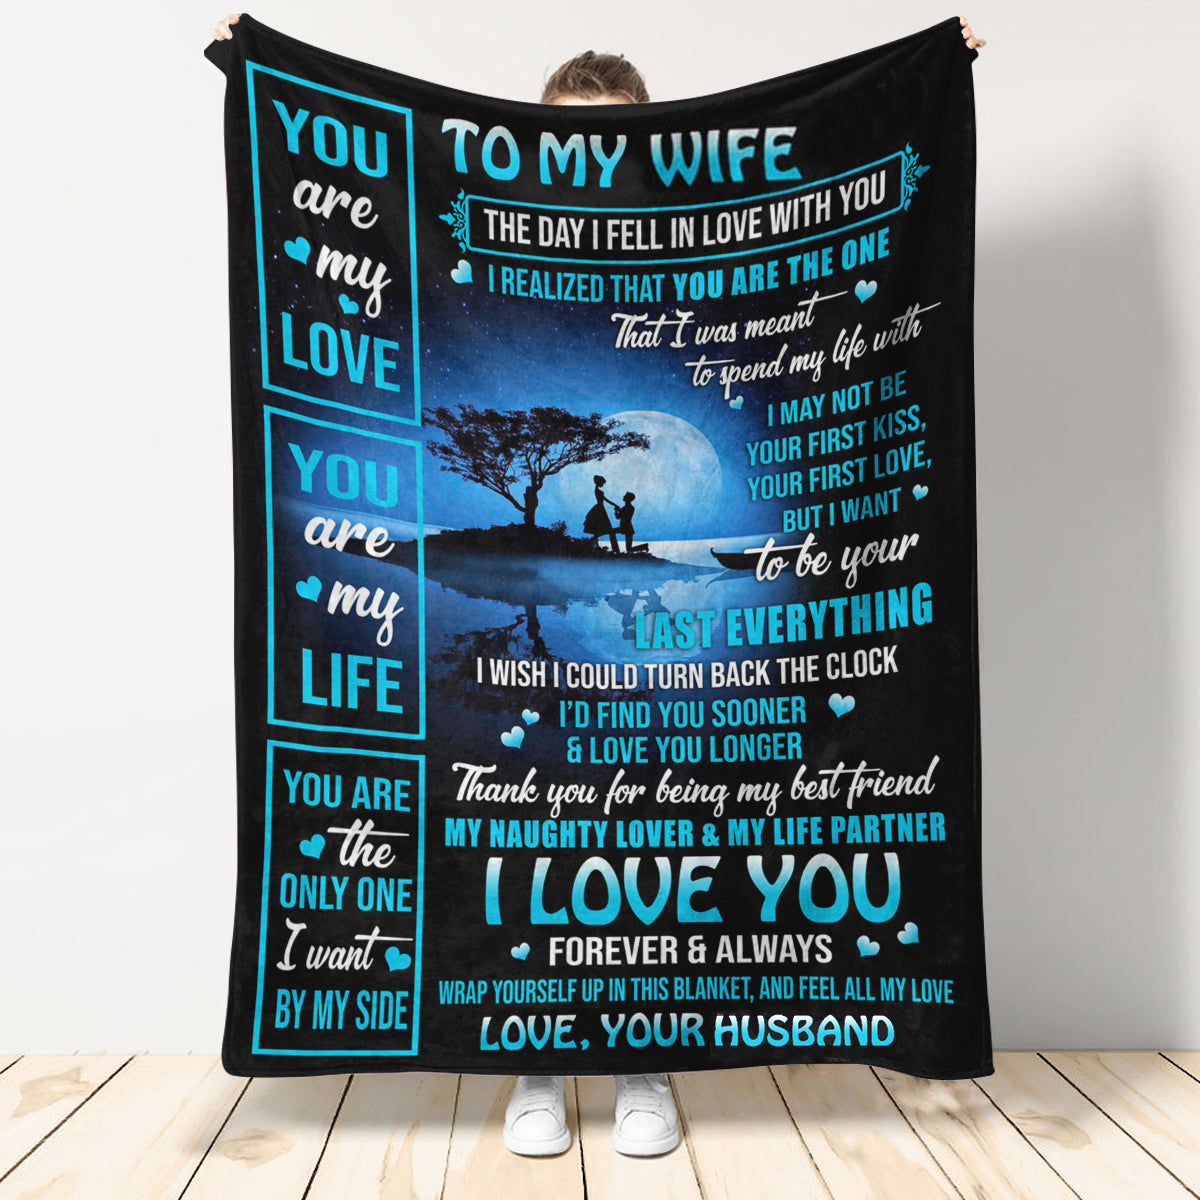 Gift For Husband Blanket, To My Husband You Are My Love You Are My Life - Love From Wife